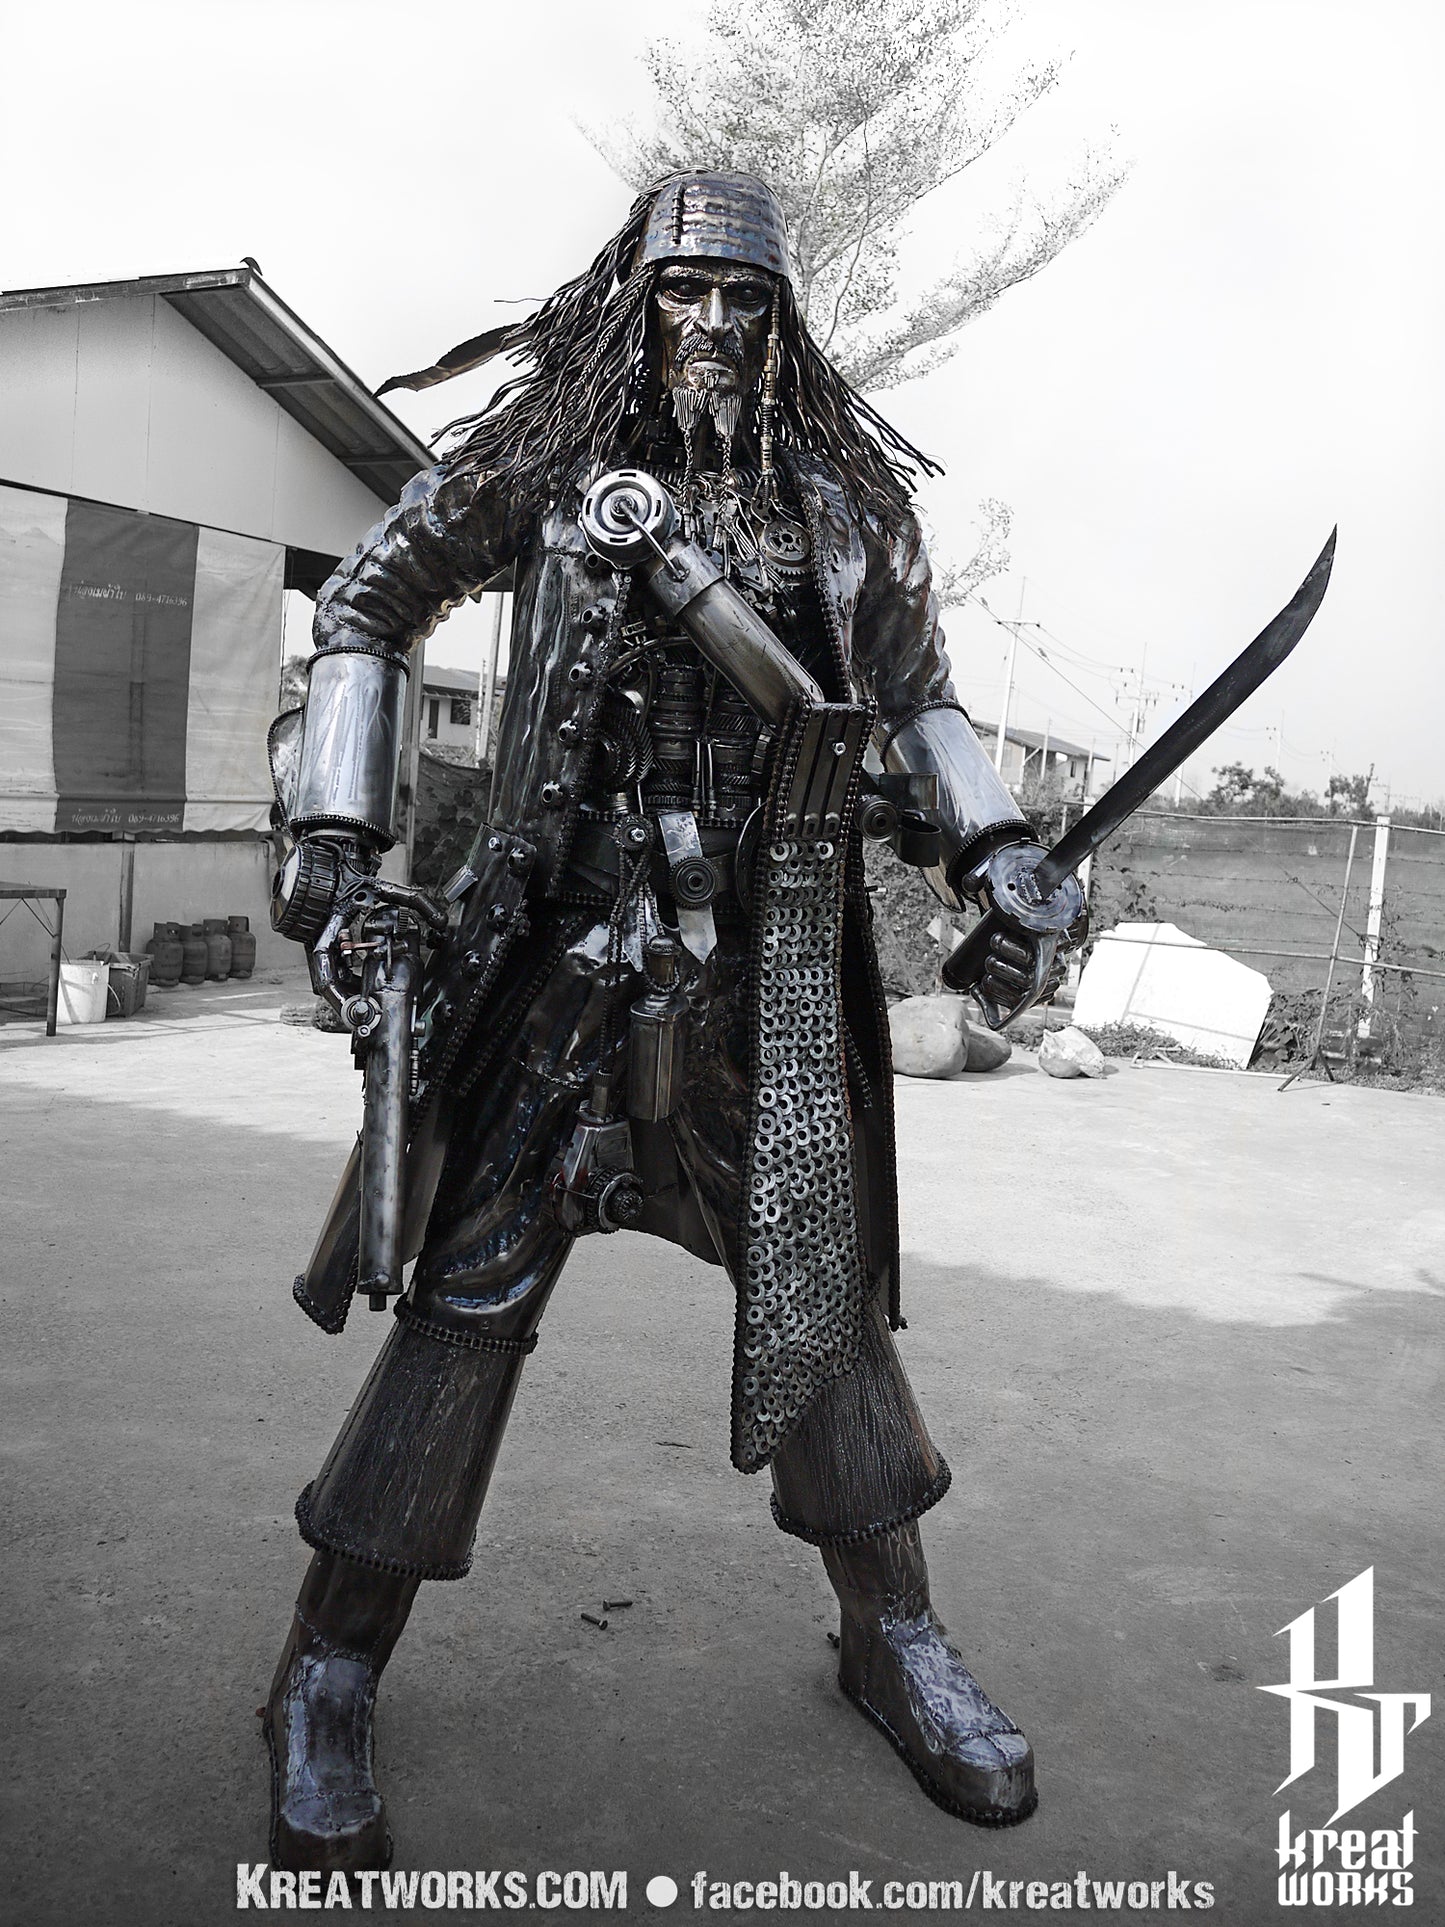 Steampunk Recycled Metal Pirate (made-to-order) / Recycle Metal Sustainable Sculpture Art